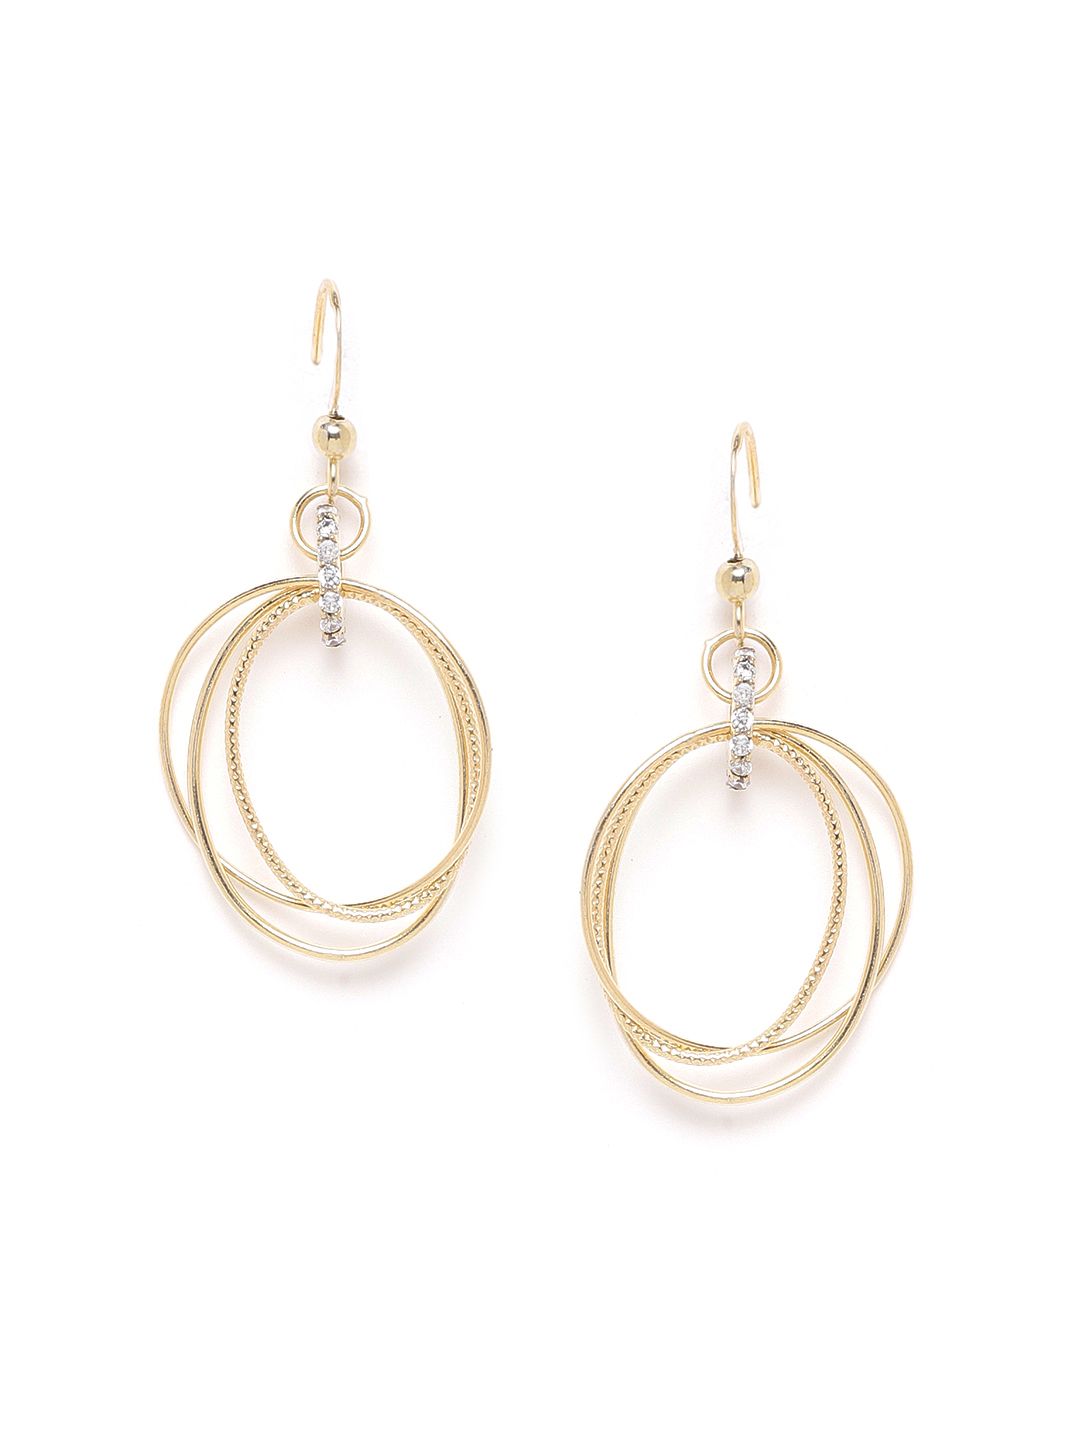 Carlton London Gold-Plated CZ-Studded Oval Drop Earrings Price in India